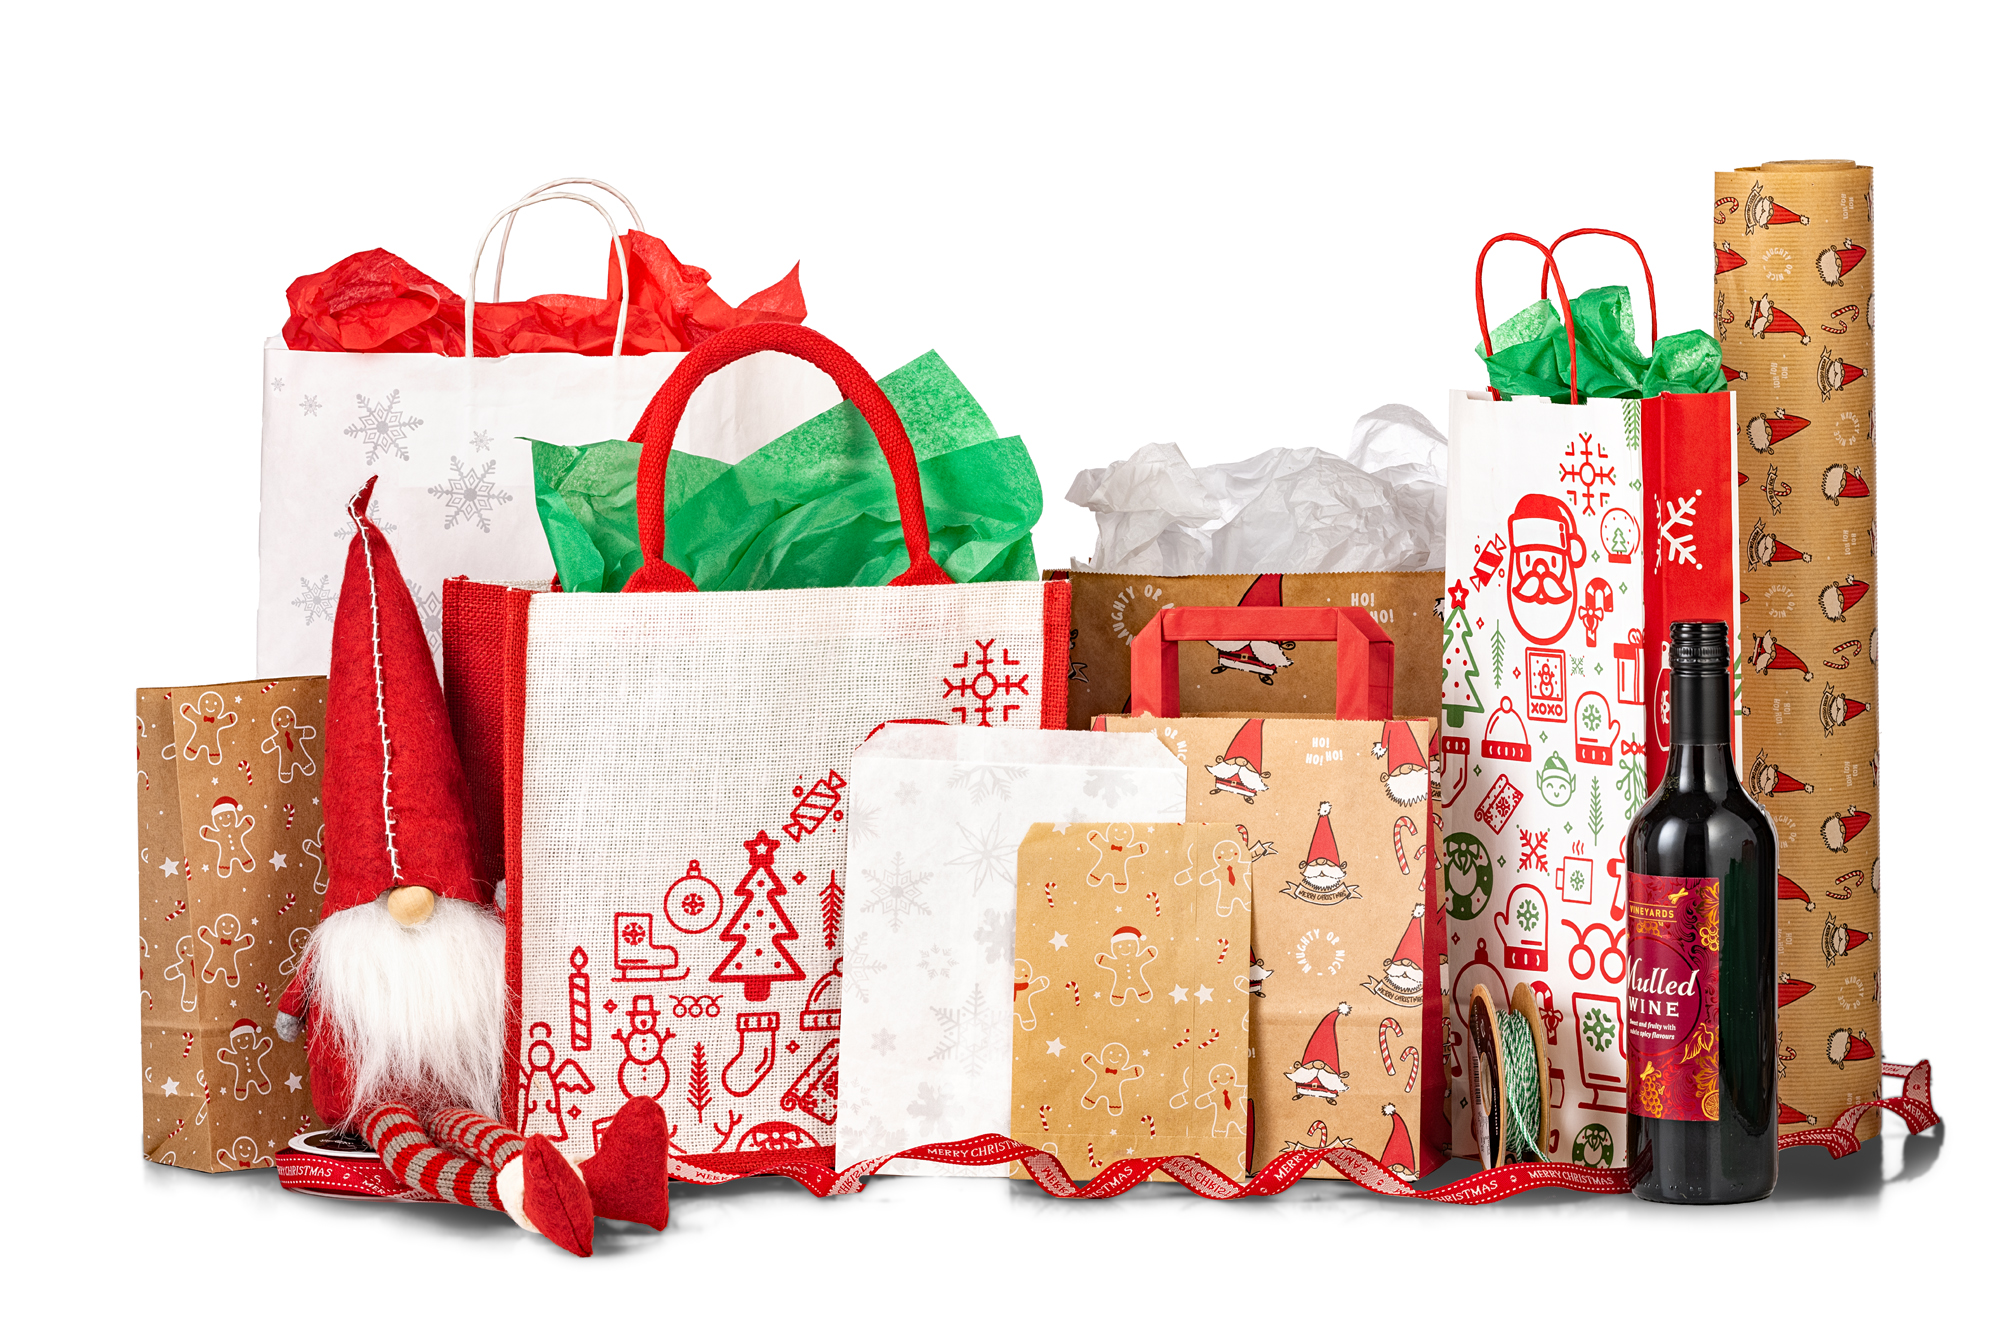 How to choose the right Christmas Carrier Bags